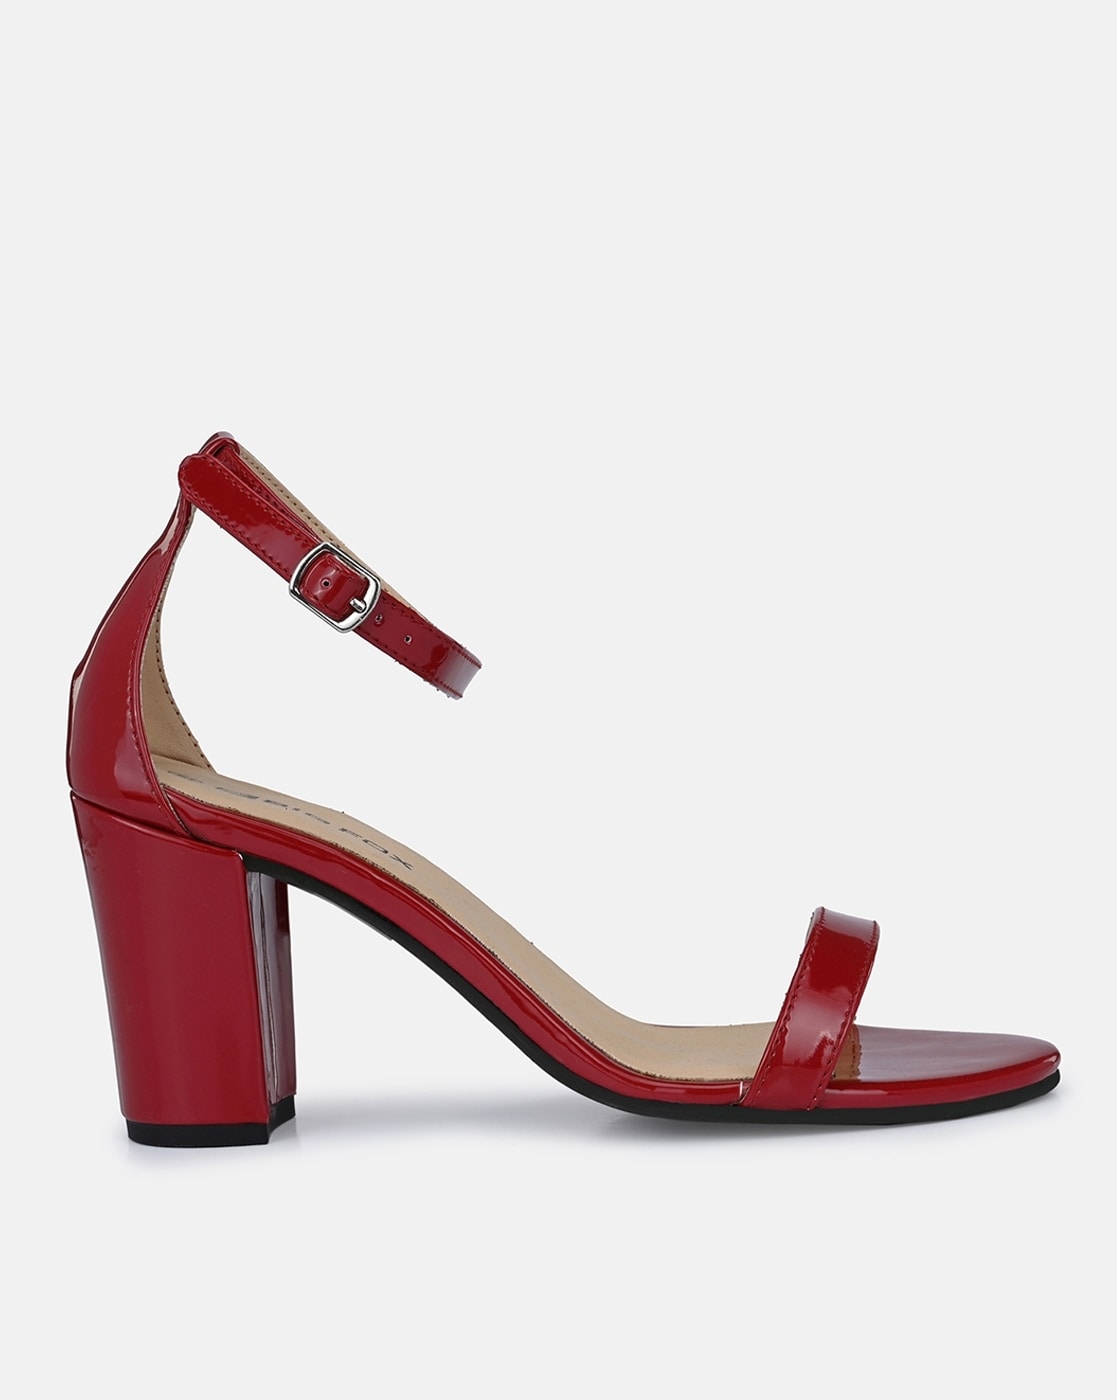 New Look strappy block heeled sandals in red | ASOS